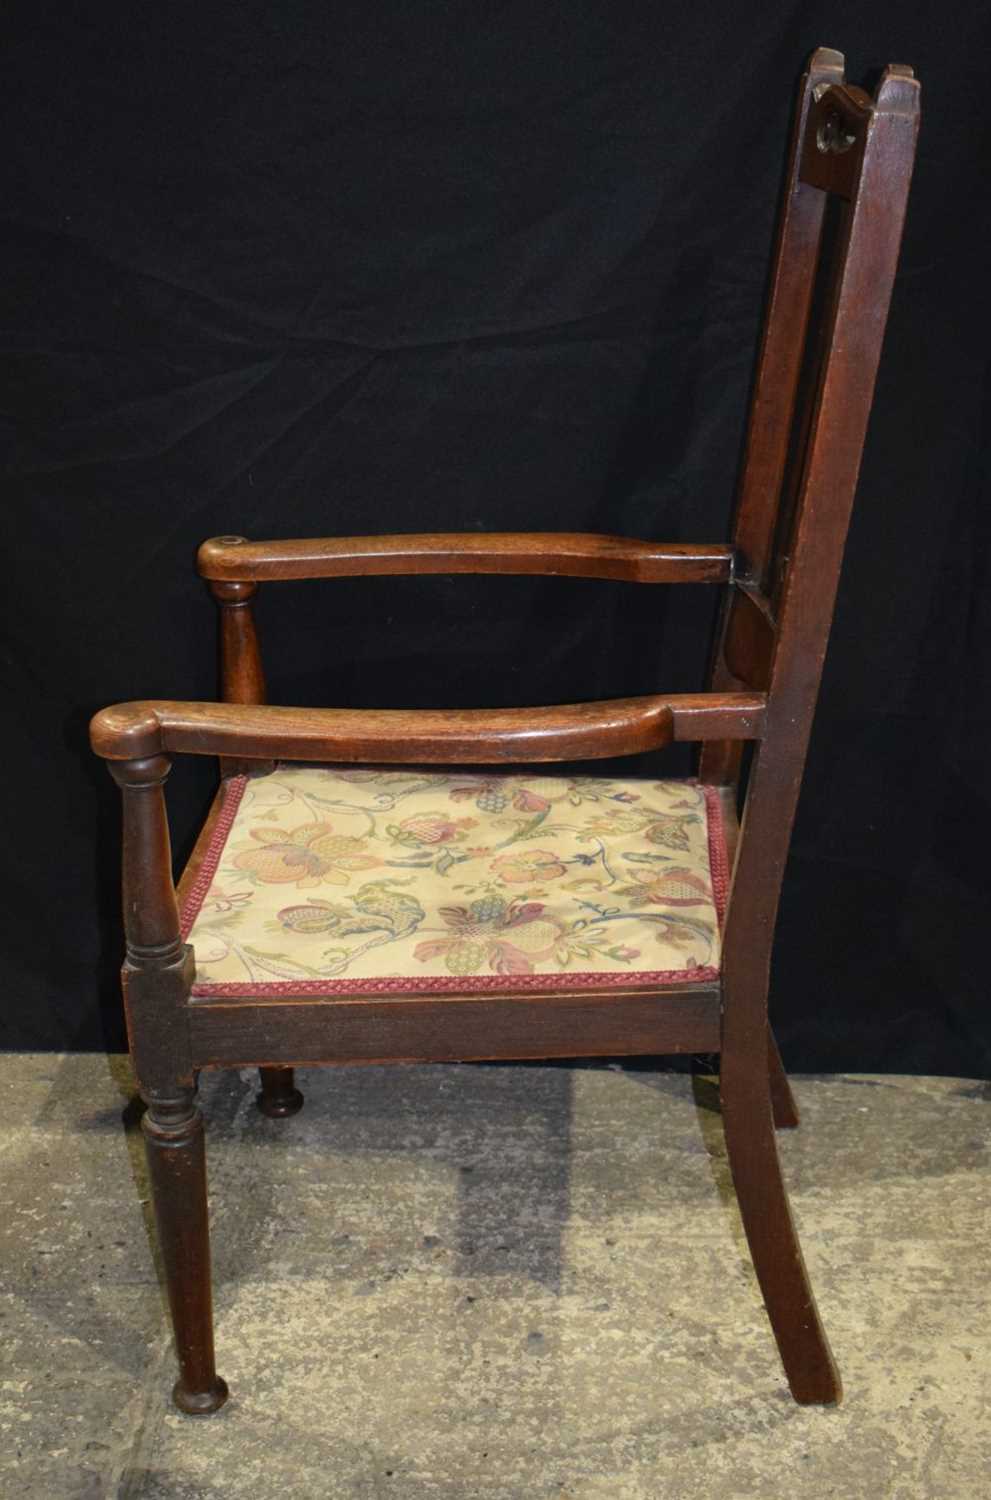 A large 19th Century Oak armchair with covered wooden seat 115 x 58 x 54 cm - Image 3 of 10